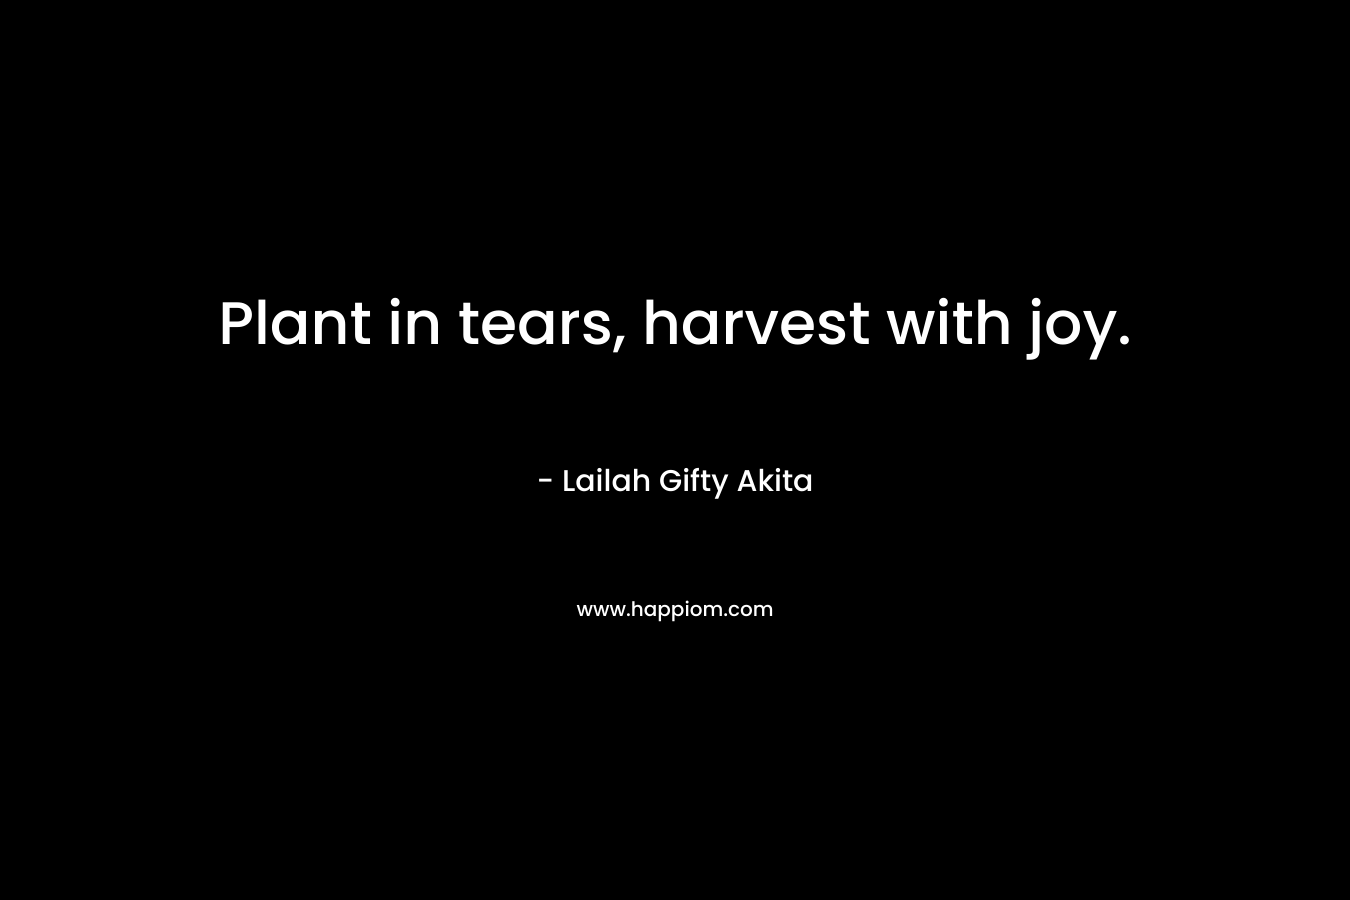 Plant in tears, harvest with joy.